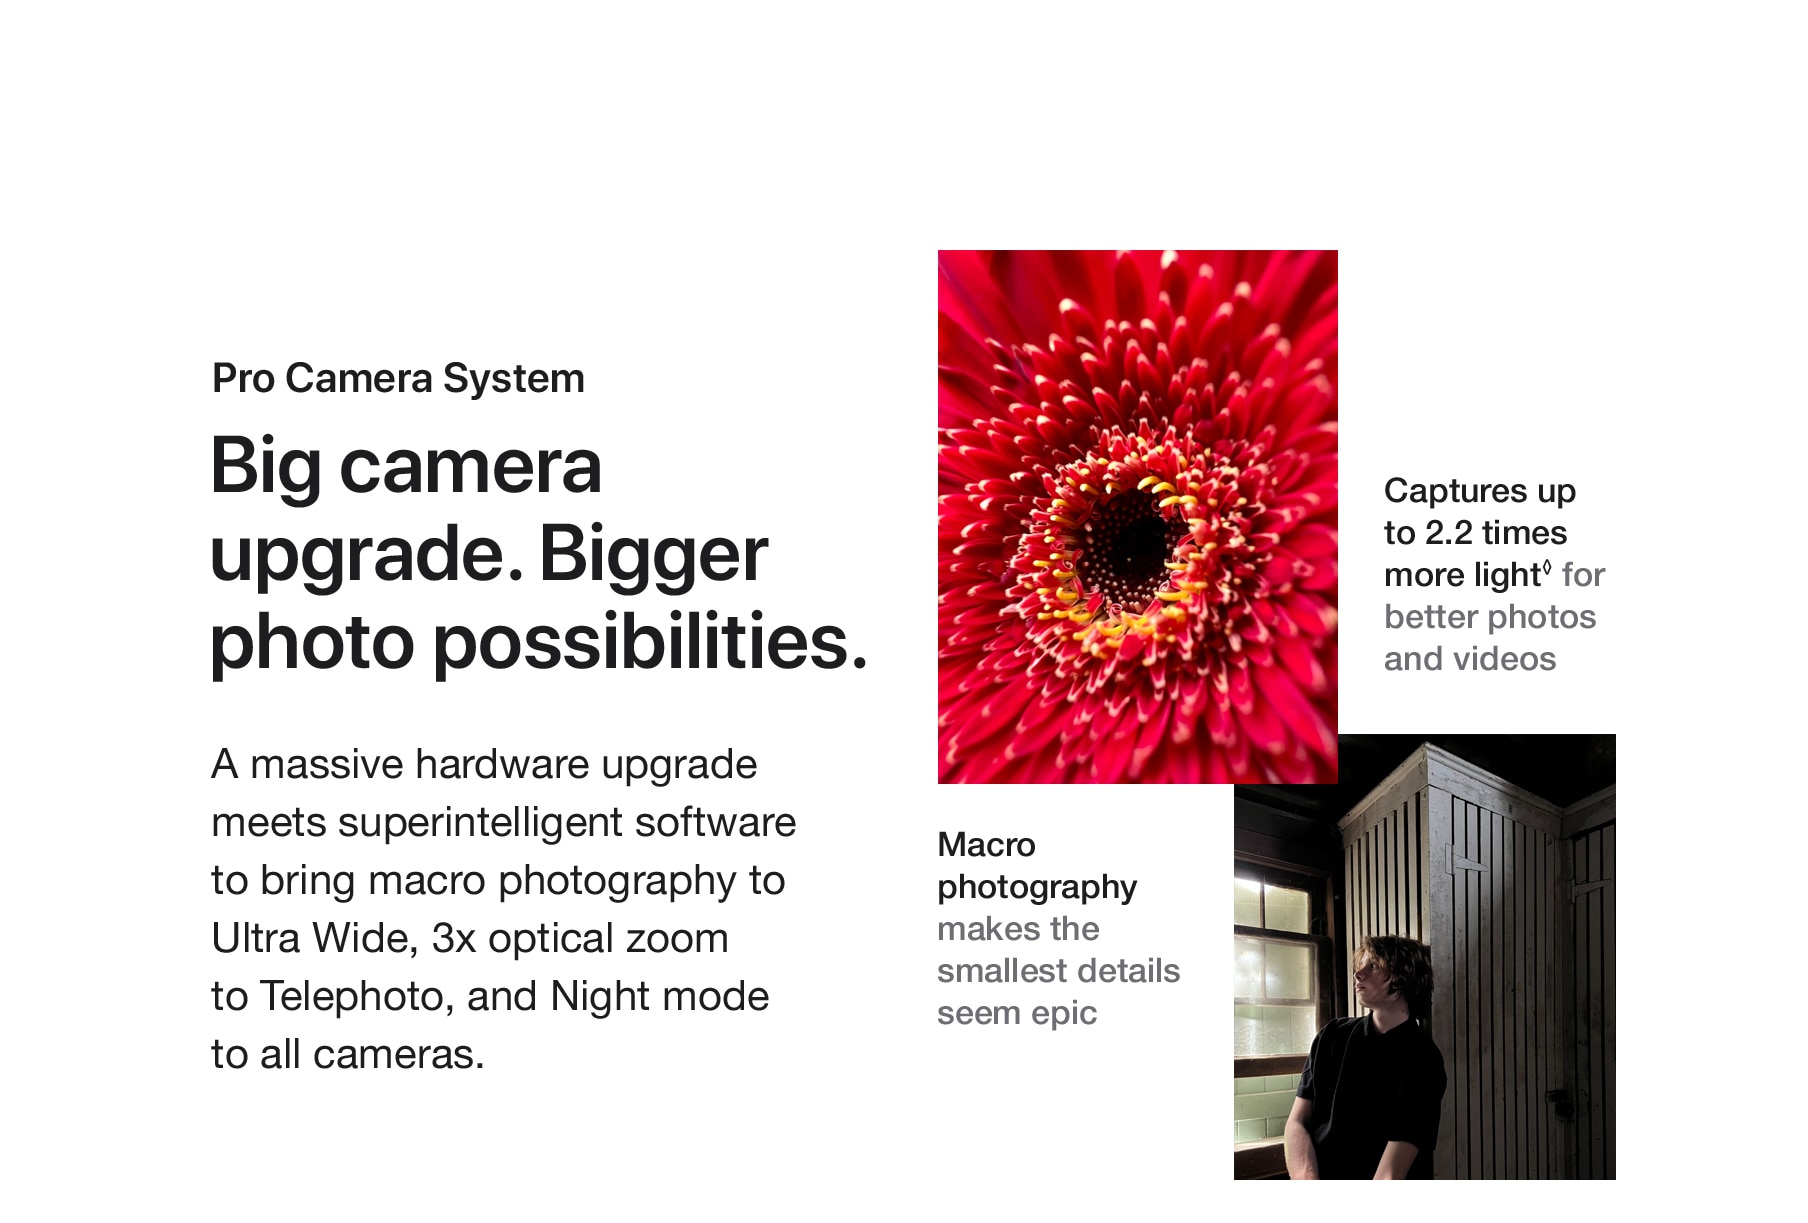 Pro Camera System. Big camera upgrade. Bigger photo possibilities. A massive hardware upgrade meets superintelligent software to bring macro photography to Ultra Wide, 3x optical zoom to Telephoto, and Night mode to all cameras.